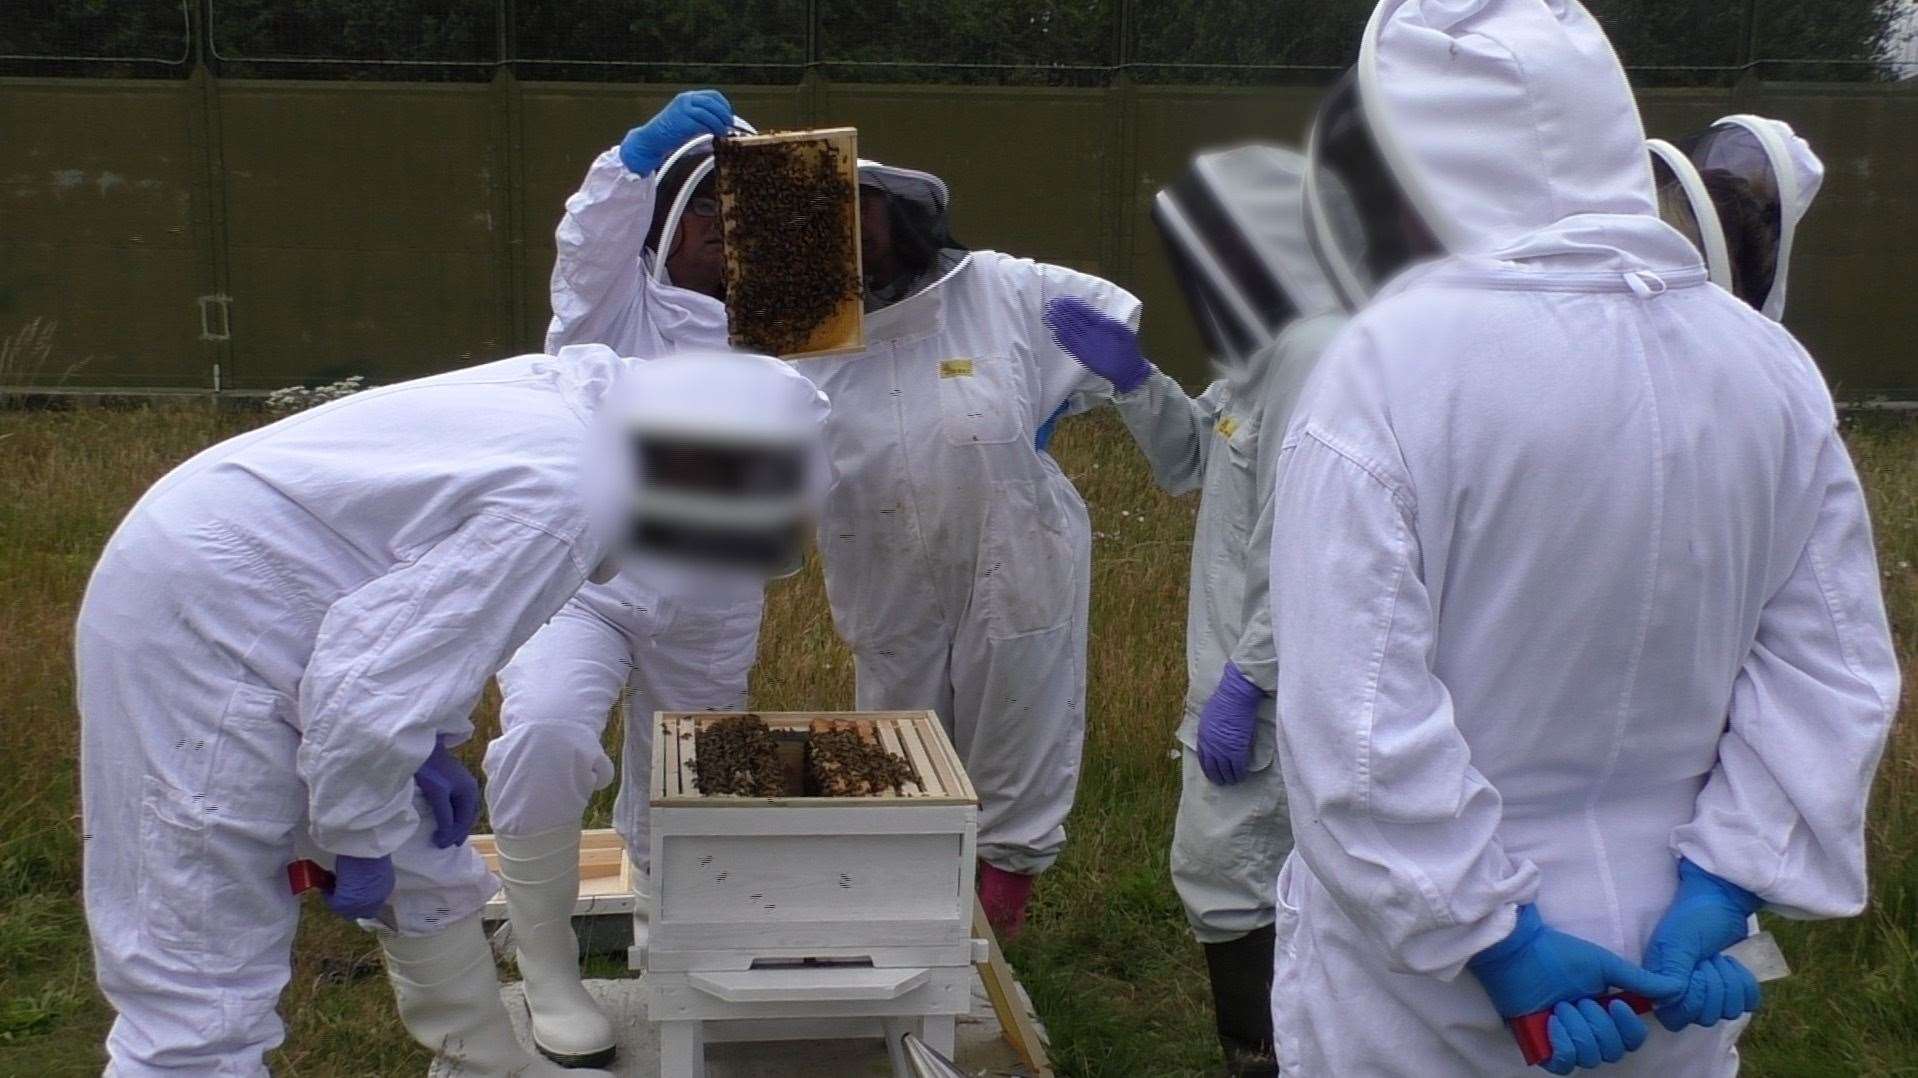 Staff and prisoners tend to the bees together once a week